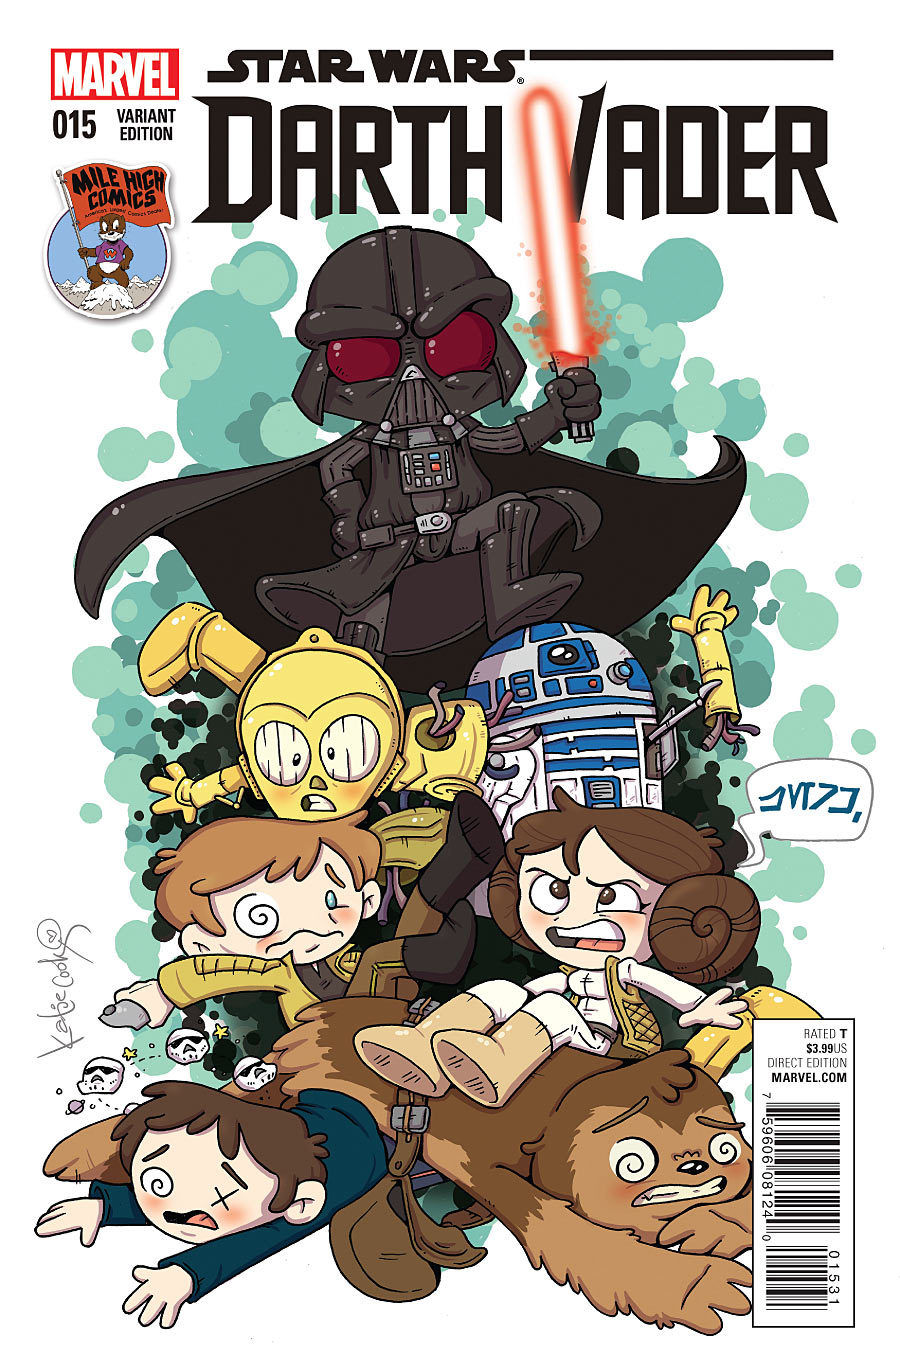 Darth Vader #15 (Katie Cook Mile High Comics Variant Cover) (06.01.2016)